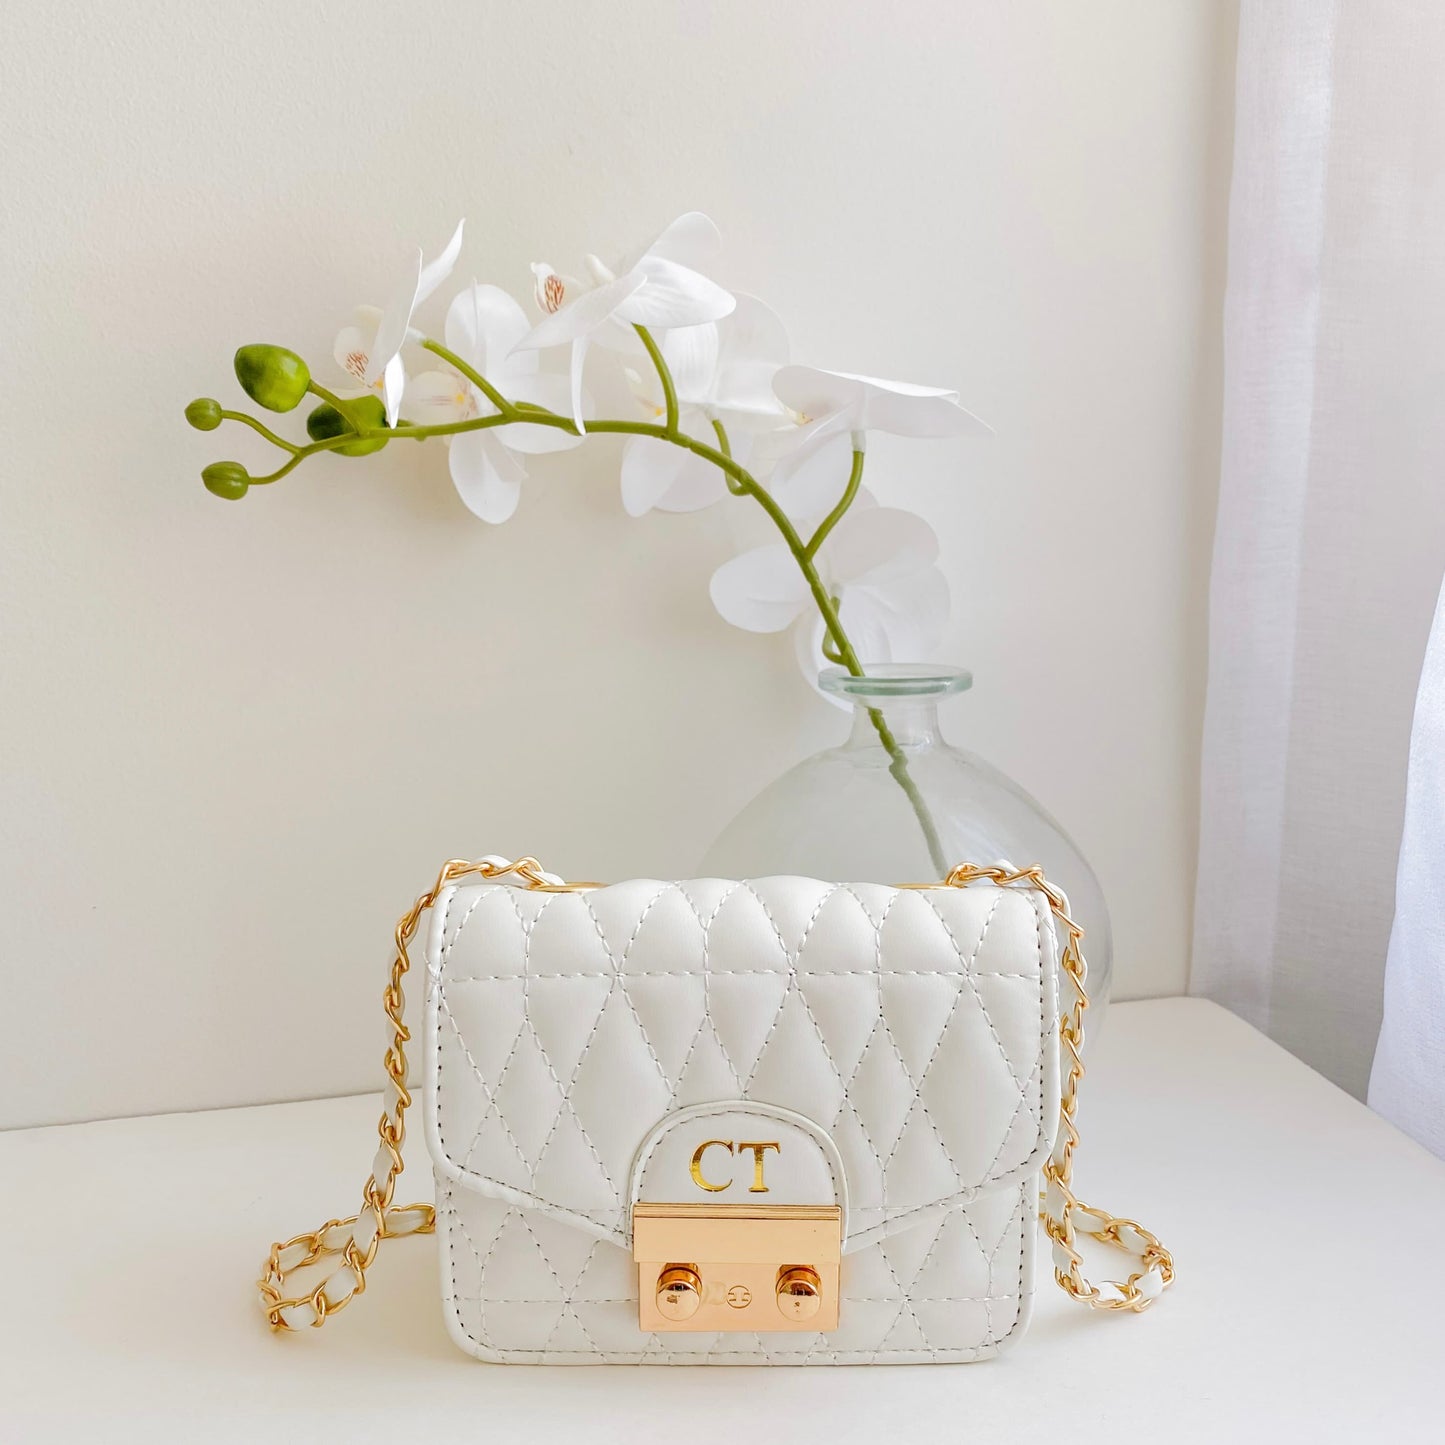 Miss Charlotte - The Luxe Bag